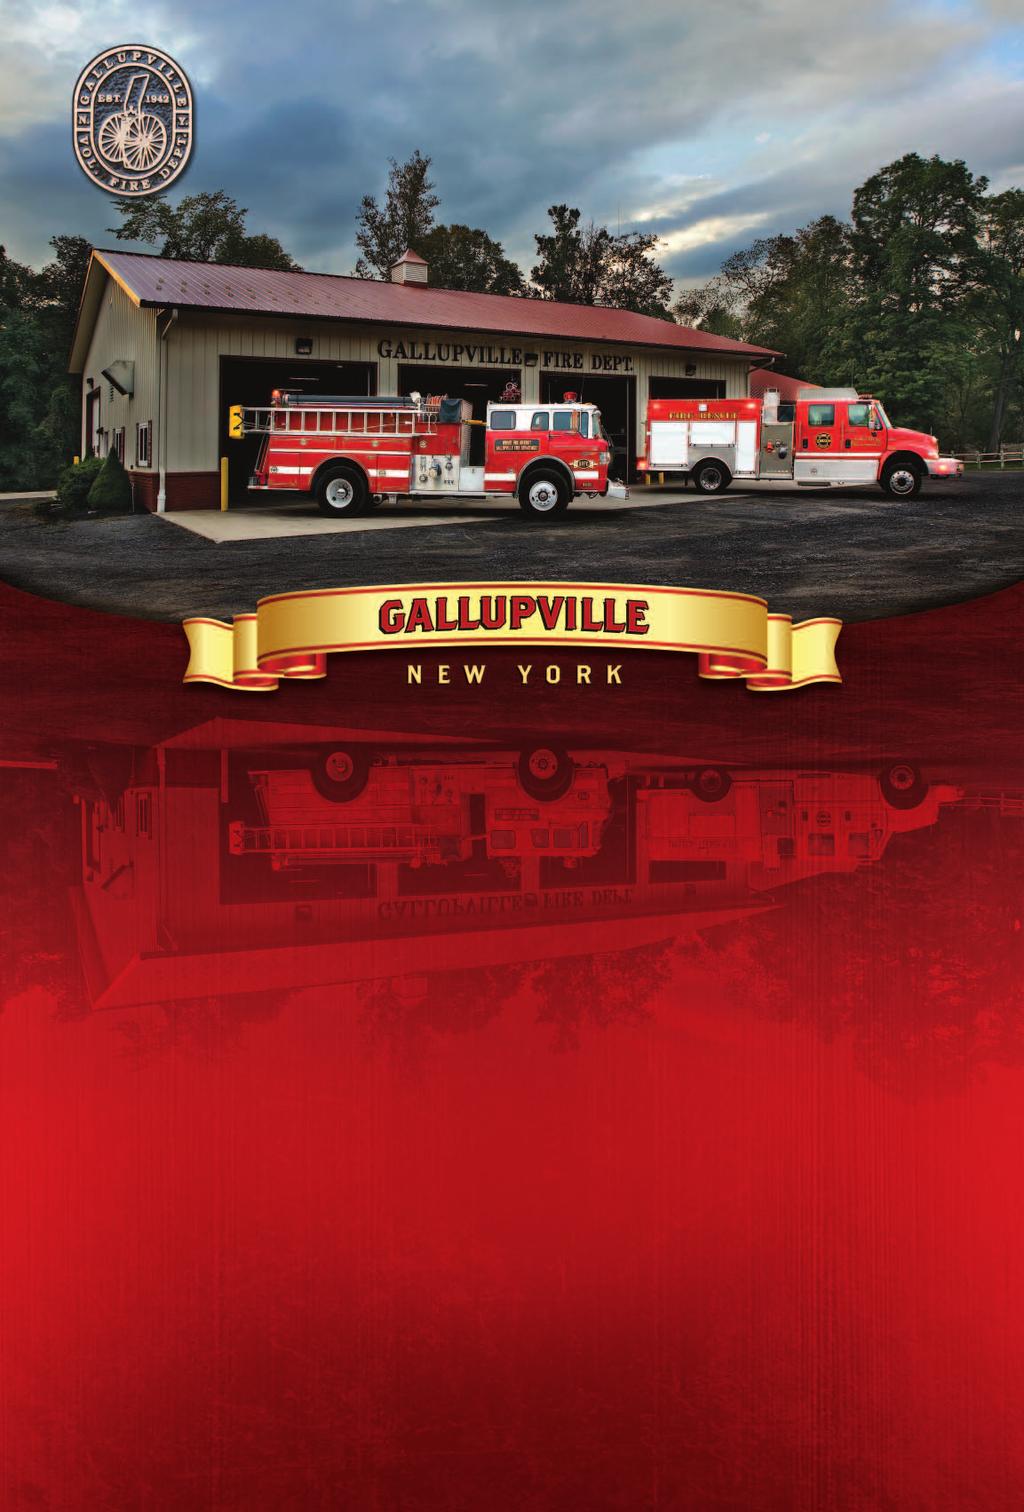 Gallupville Volunteer Fire Department Proudly Serving the Wright Community Since 1942 APRIL 1 Palm Sunday 2 3 4 5 6 Good Friday Full Moon 7 Jewish Passover 8 Easter Sunday 9 10 11 12 13 Last Quarter